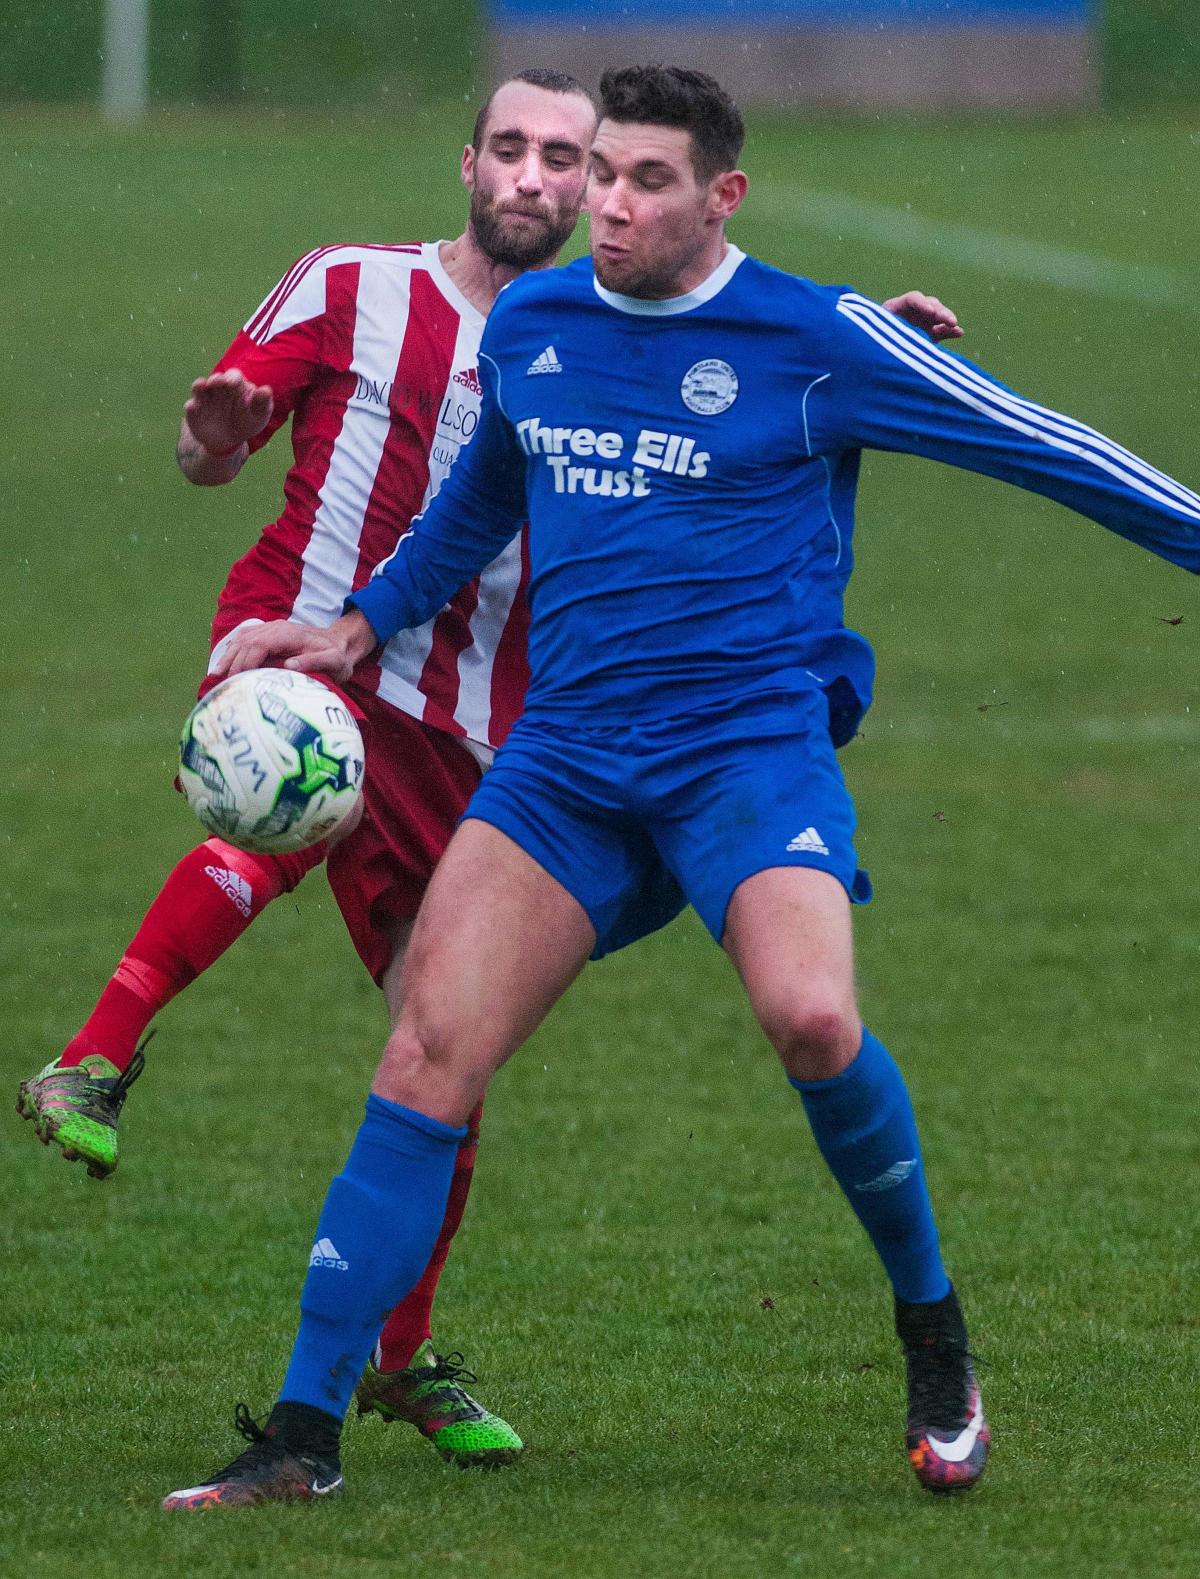 Action from Whitchurch United's 0-4 home defeat to Portland United. 25th February 2017 - Picture Andy Brooks